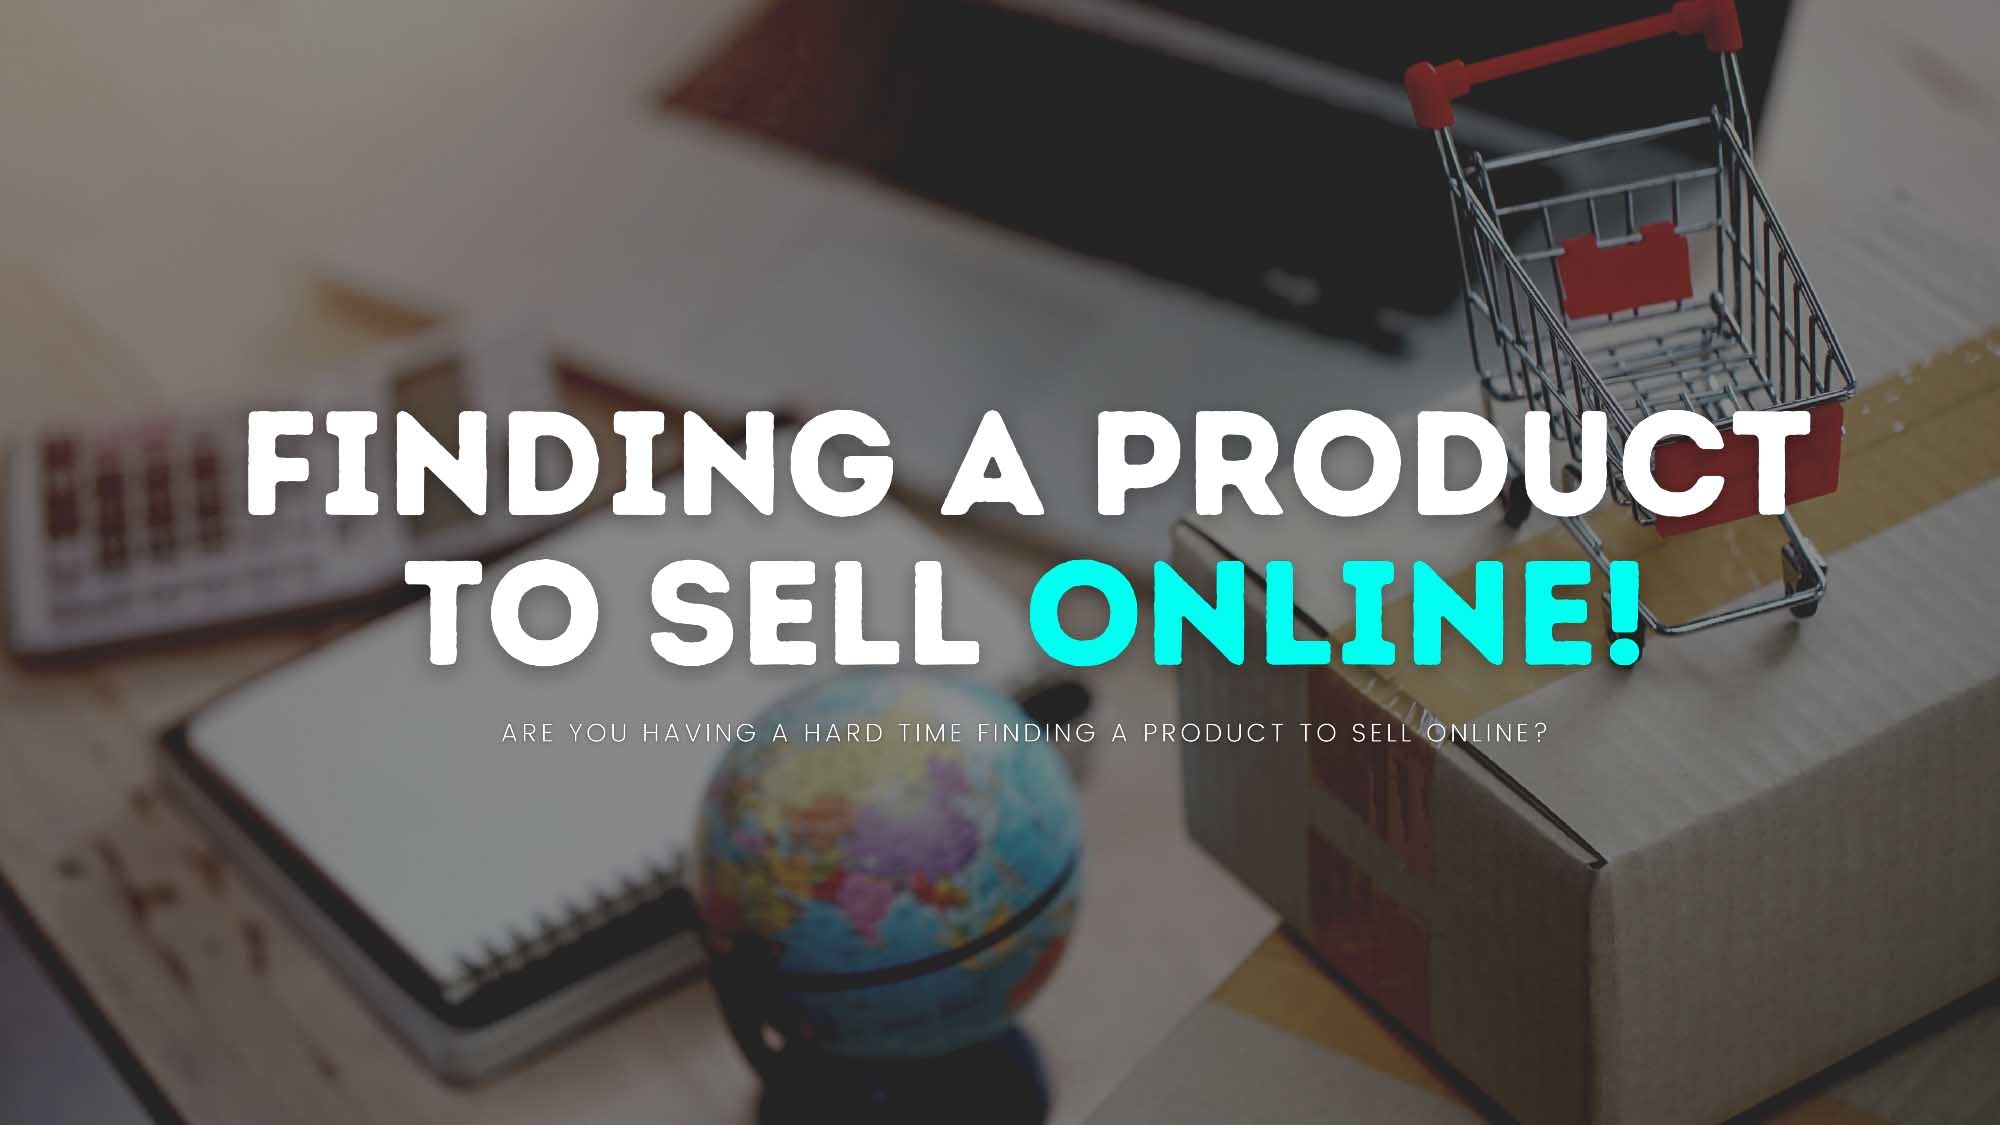 A Simple Guide To Finding A Product To Sell Online!